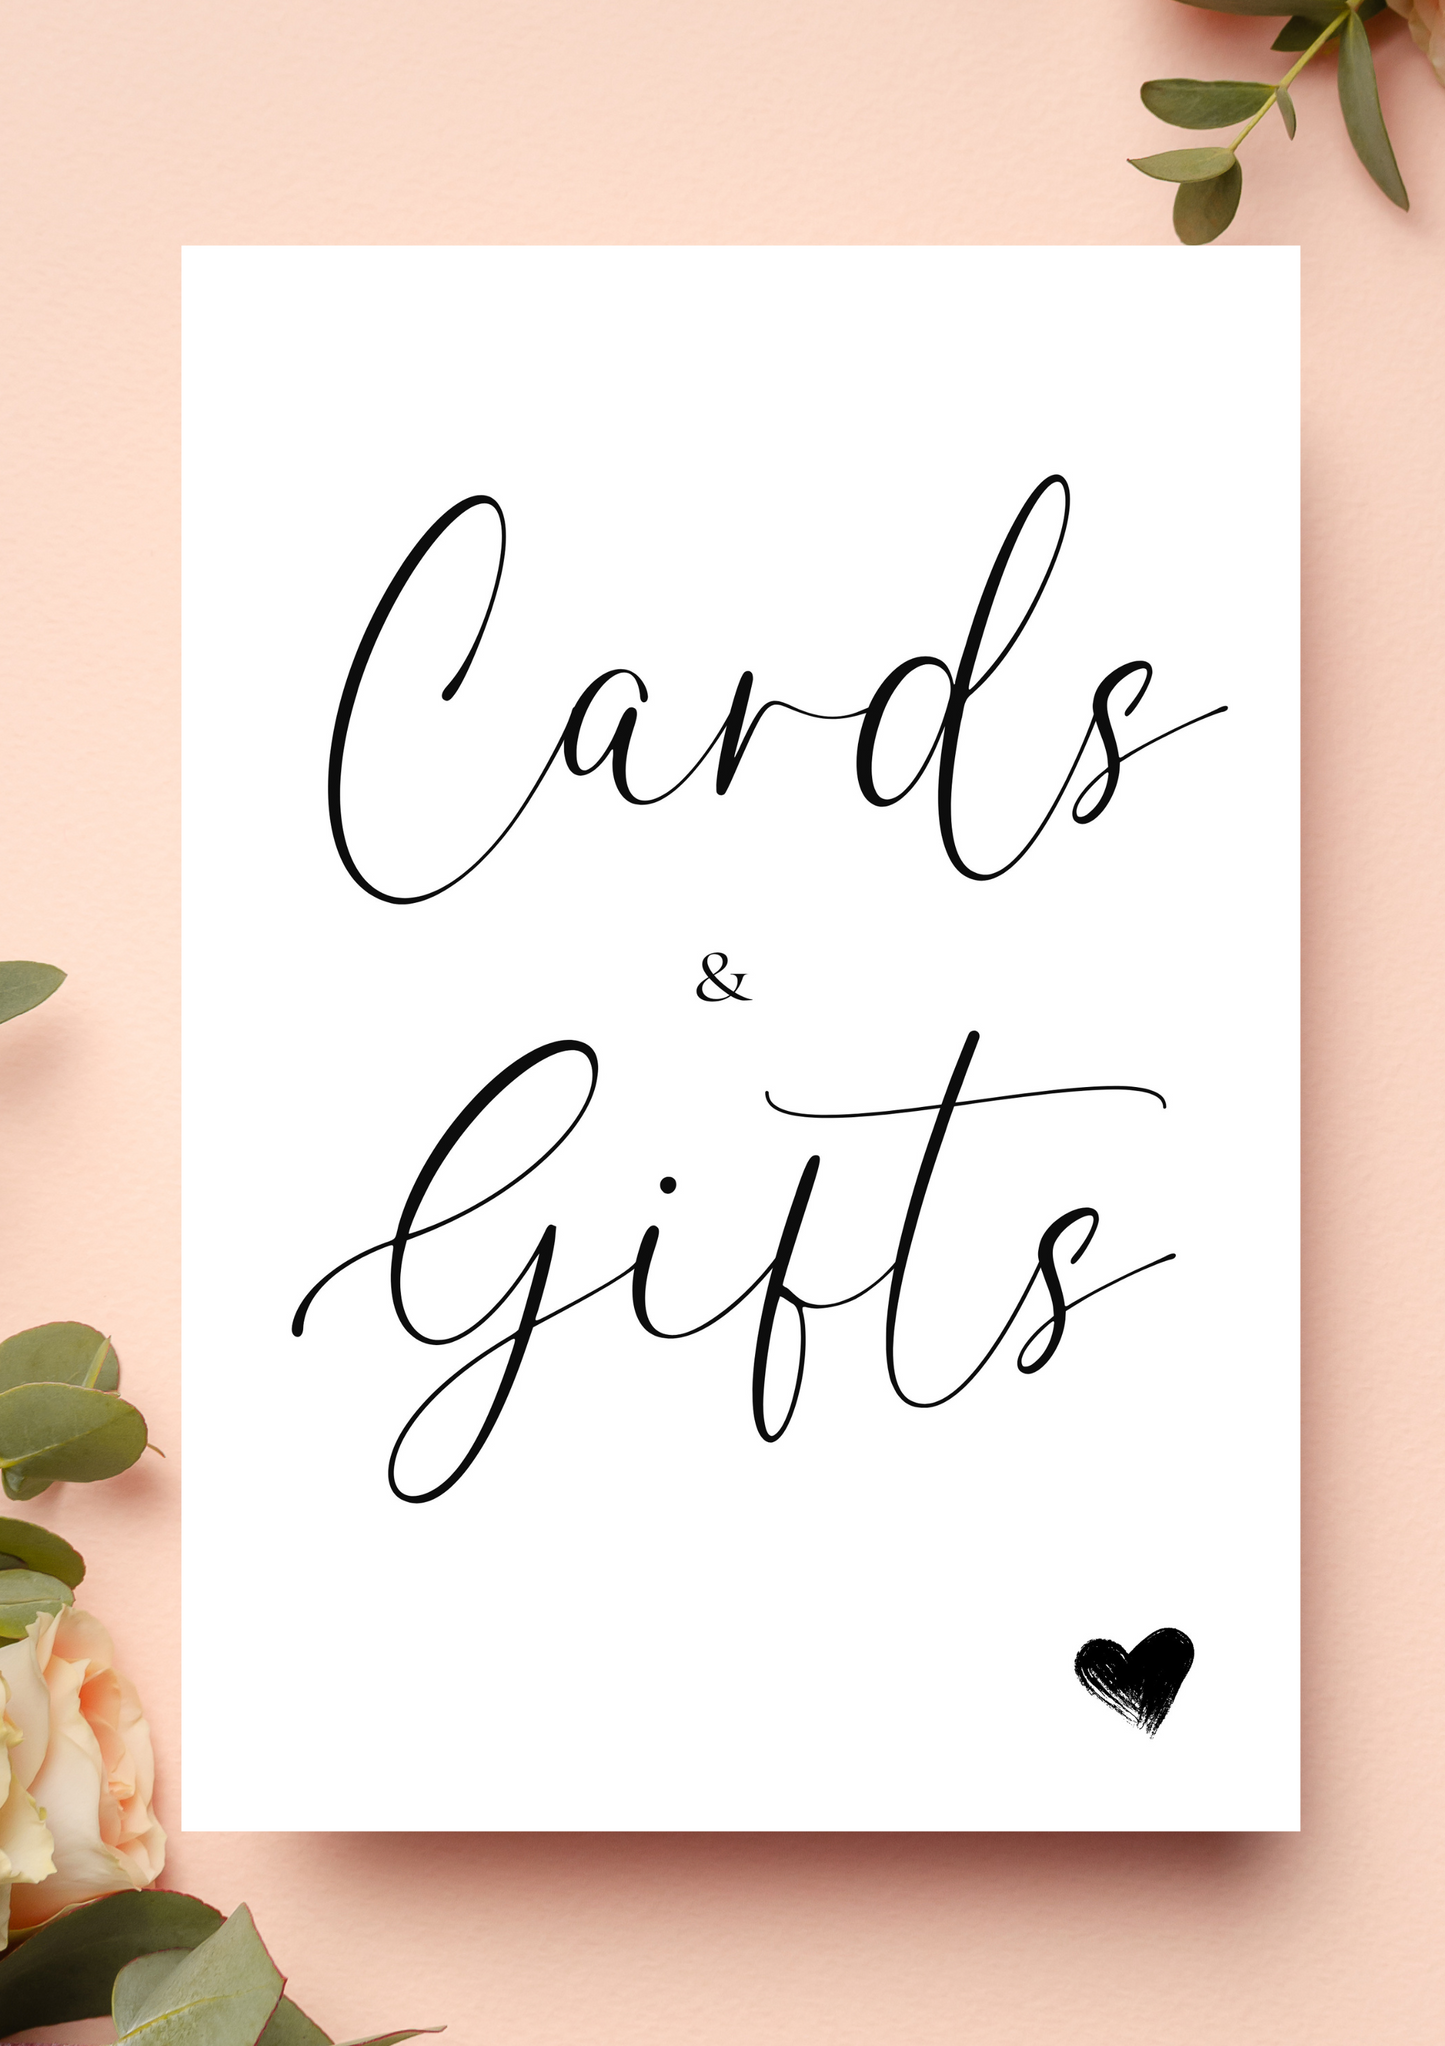 Lucy black - Cards & Gifts sign